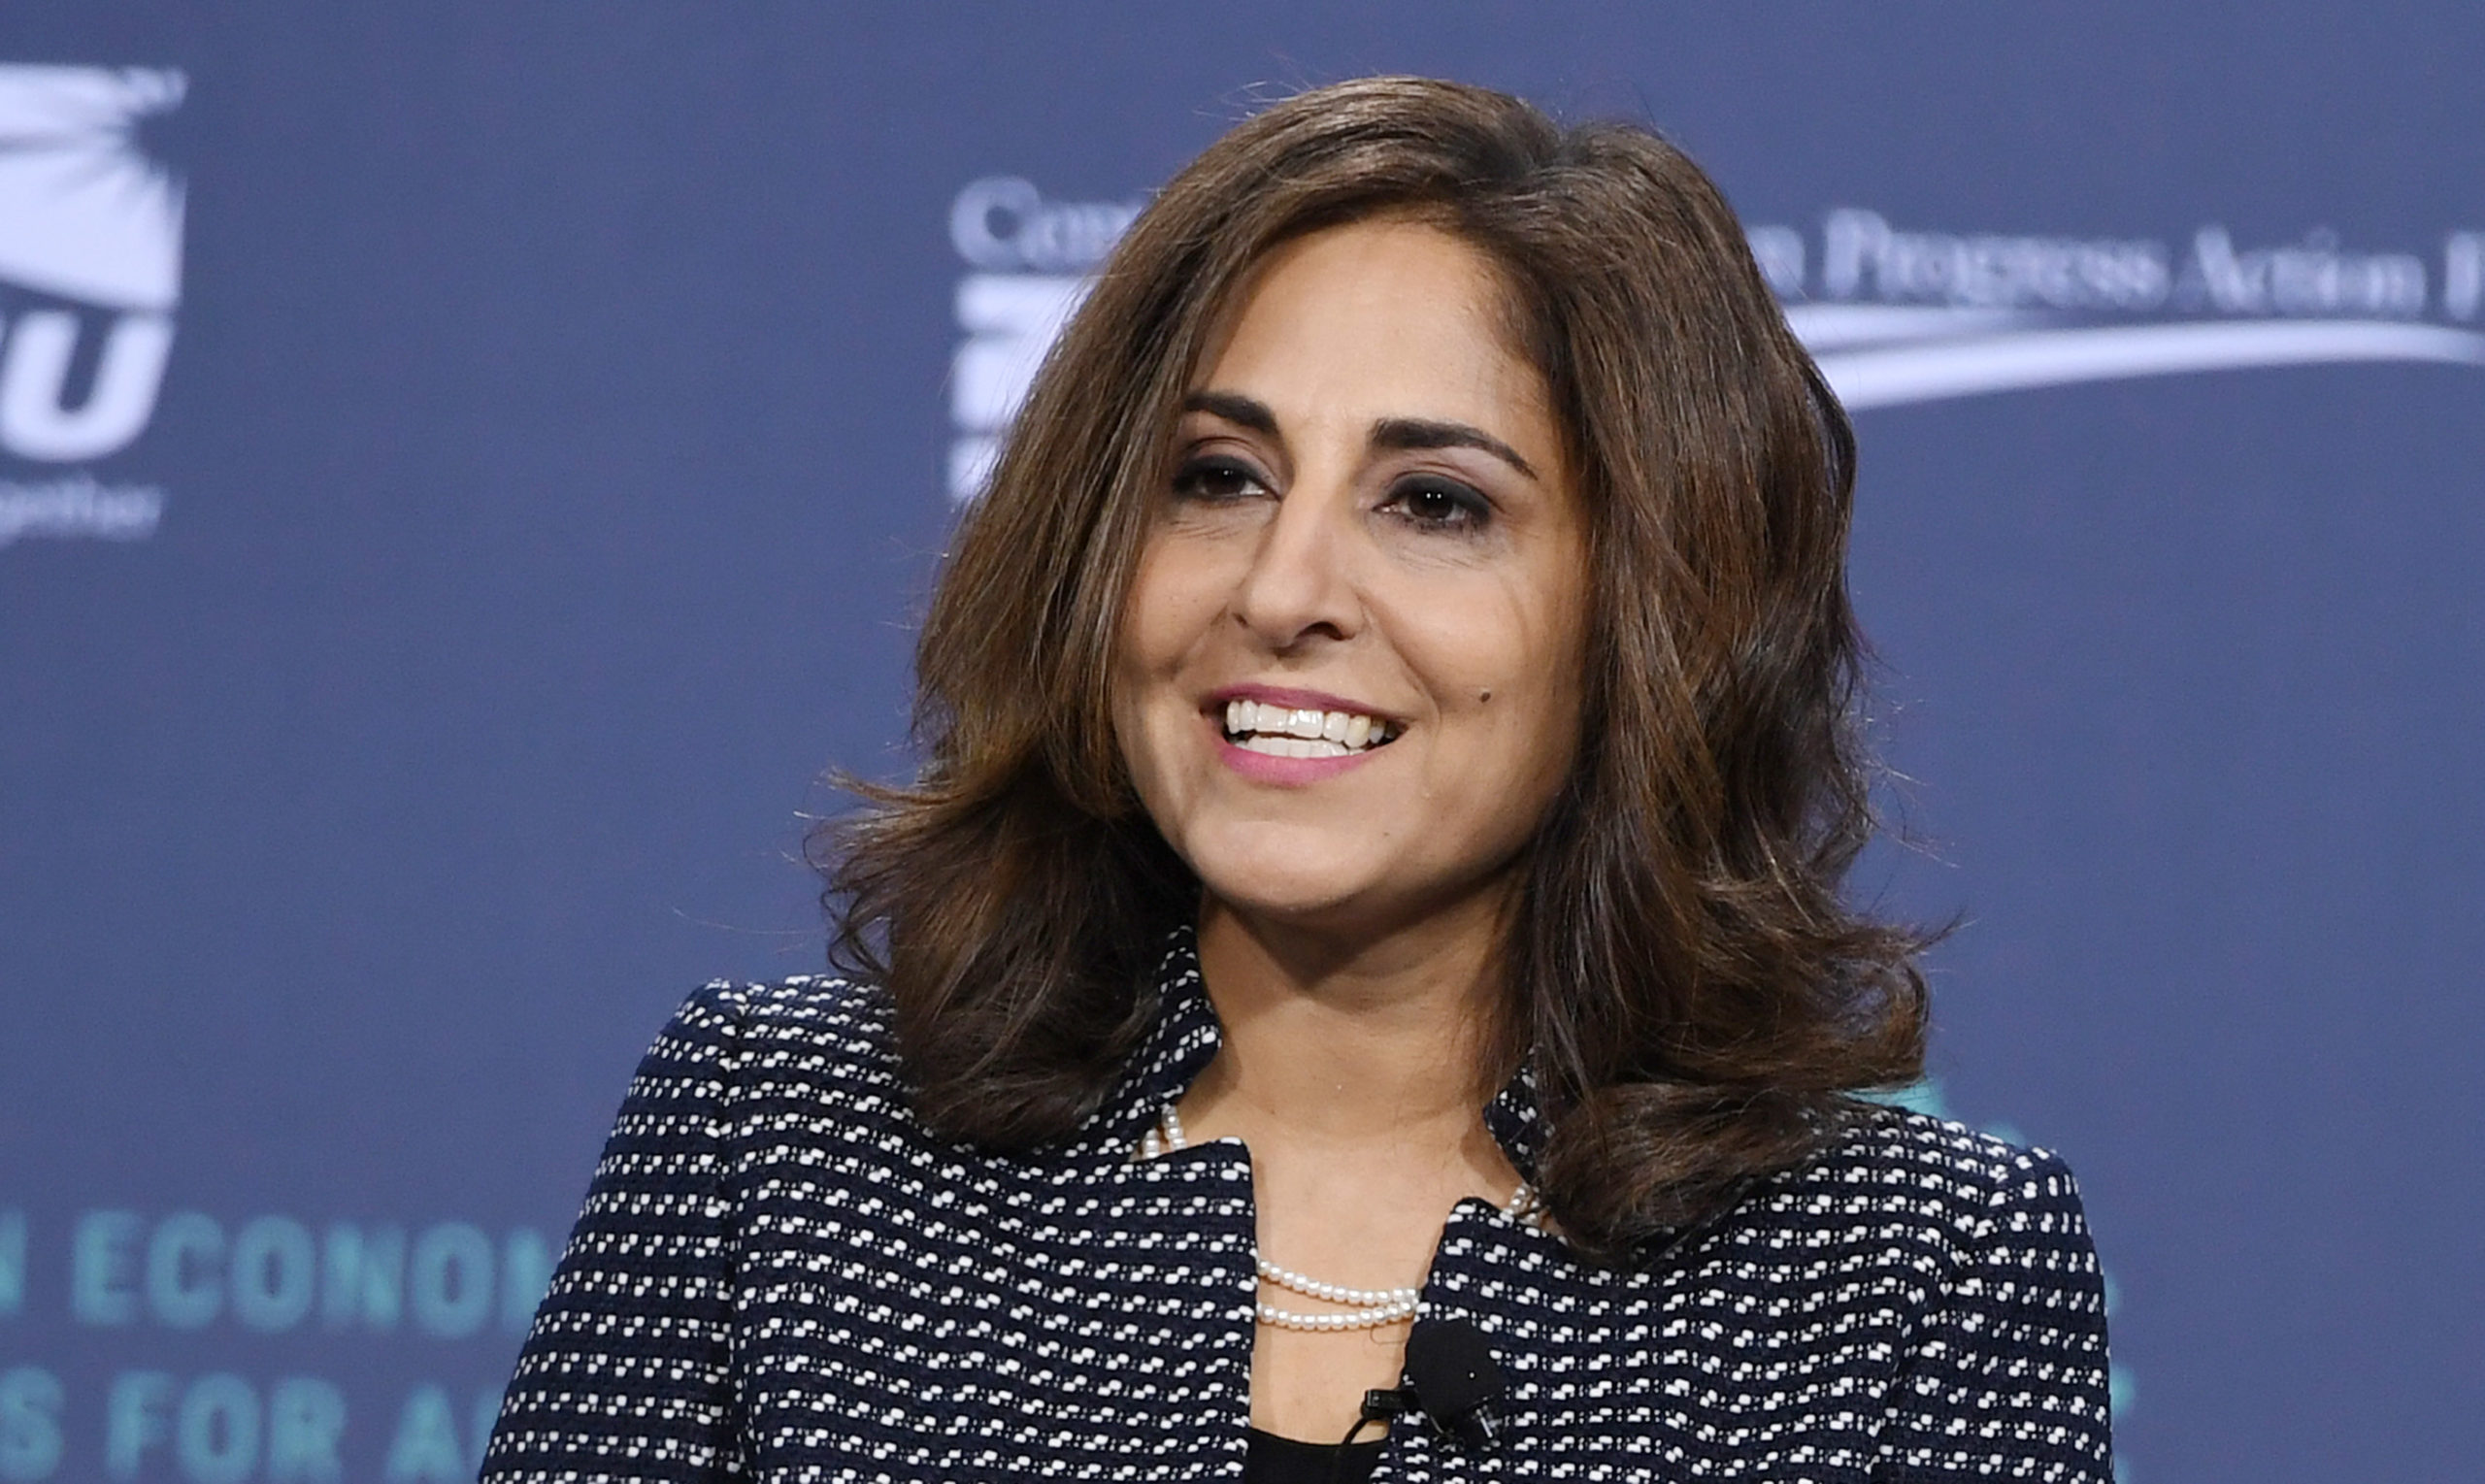 LAS VEGAS, NEVADA - APRIL 27: President and CEO of the Center for American Progress Neera Tanden speaks at the National Forum on Wages and Working People: Creating an Economy That Works for All at Enclave on April 27, 2019 in Las Vegas, Nevada. Six of the 2020 Democratic presidential candidates are attending the forum, held by the Service Employees International Union and the Center for American Progress Action Fund, to share their economic policies. (Photo by Ethan Miller/Getty Images)